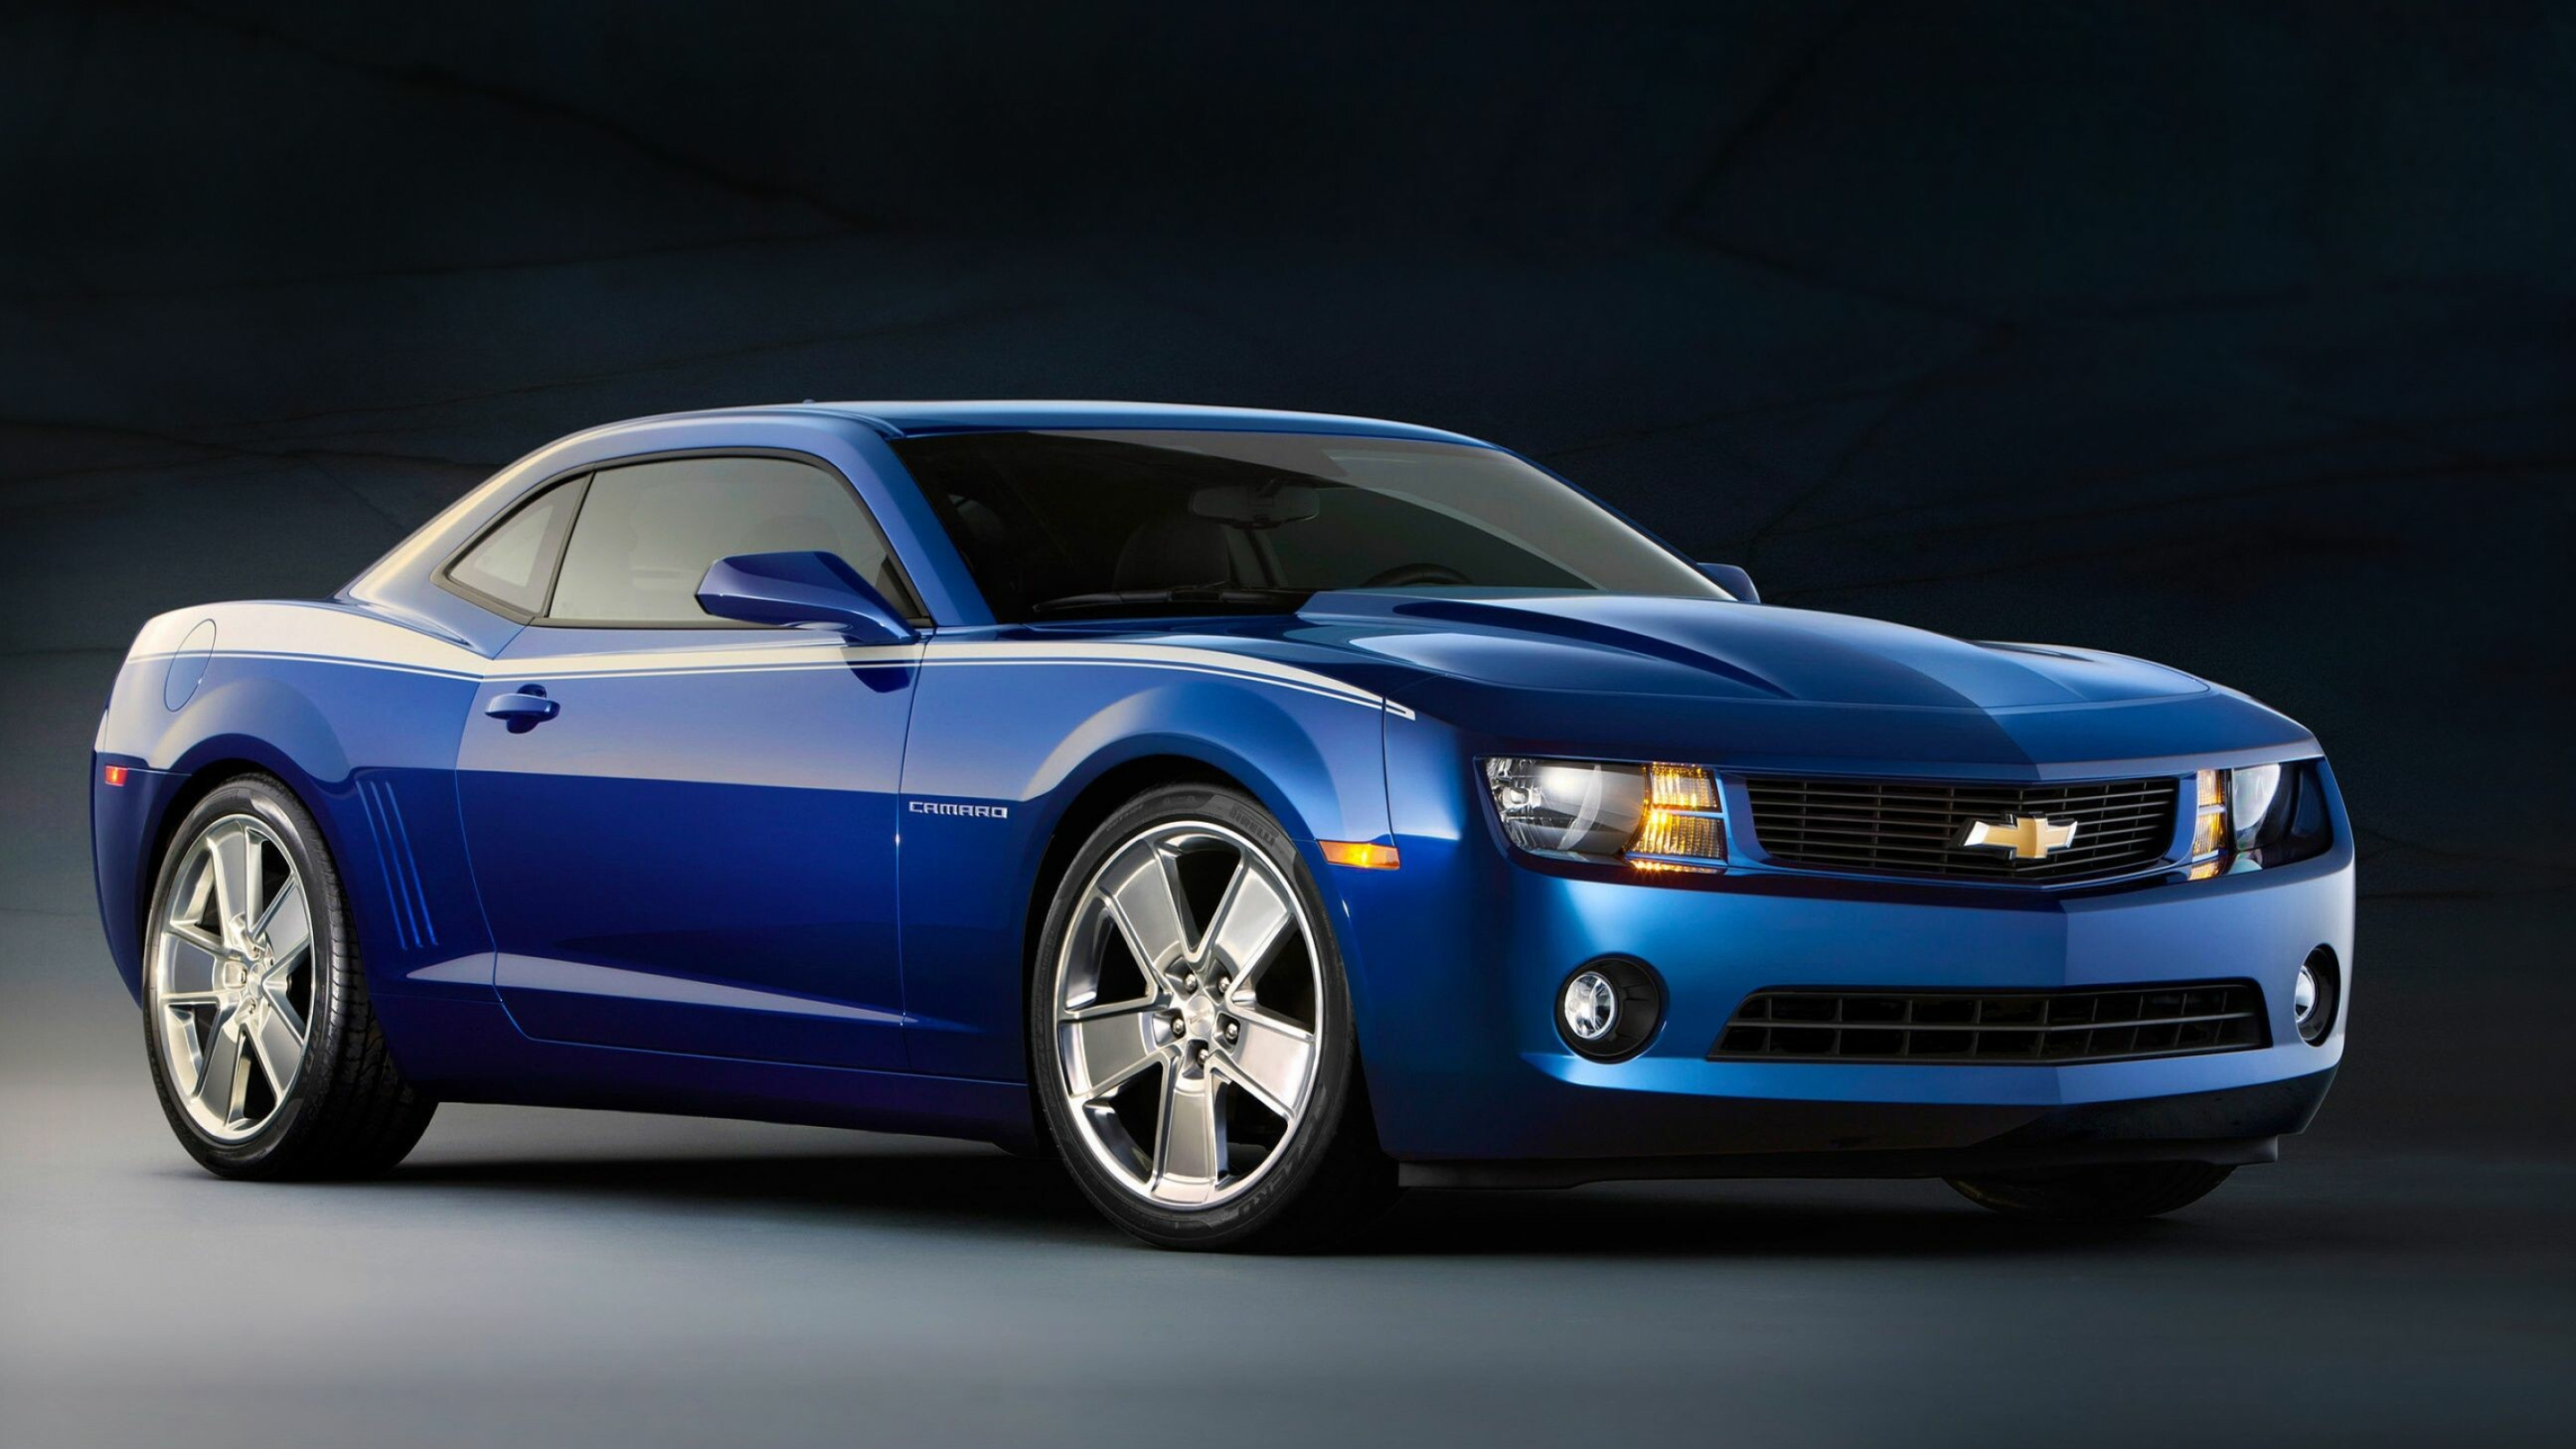 Chevrolet: The ultimate pony car, “Bow tie” logo. 2880x1620 HD Wallpaper.